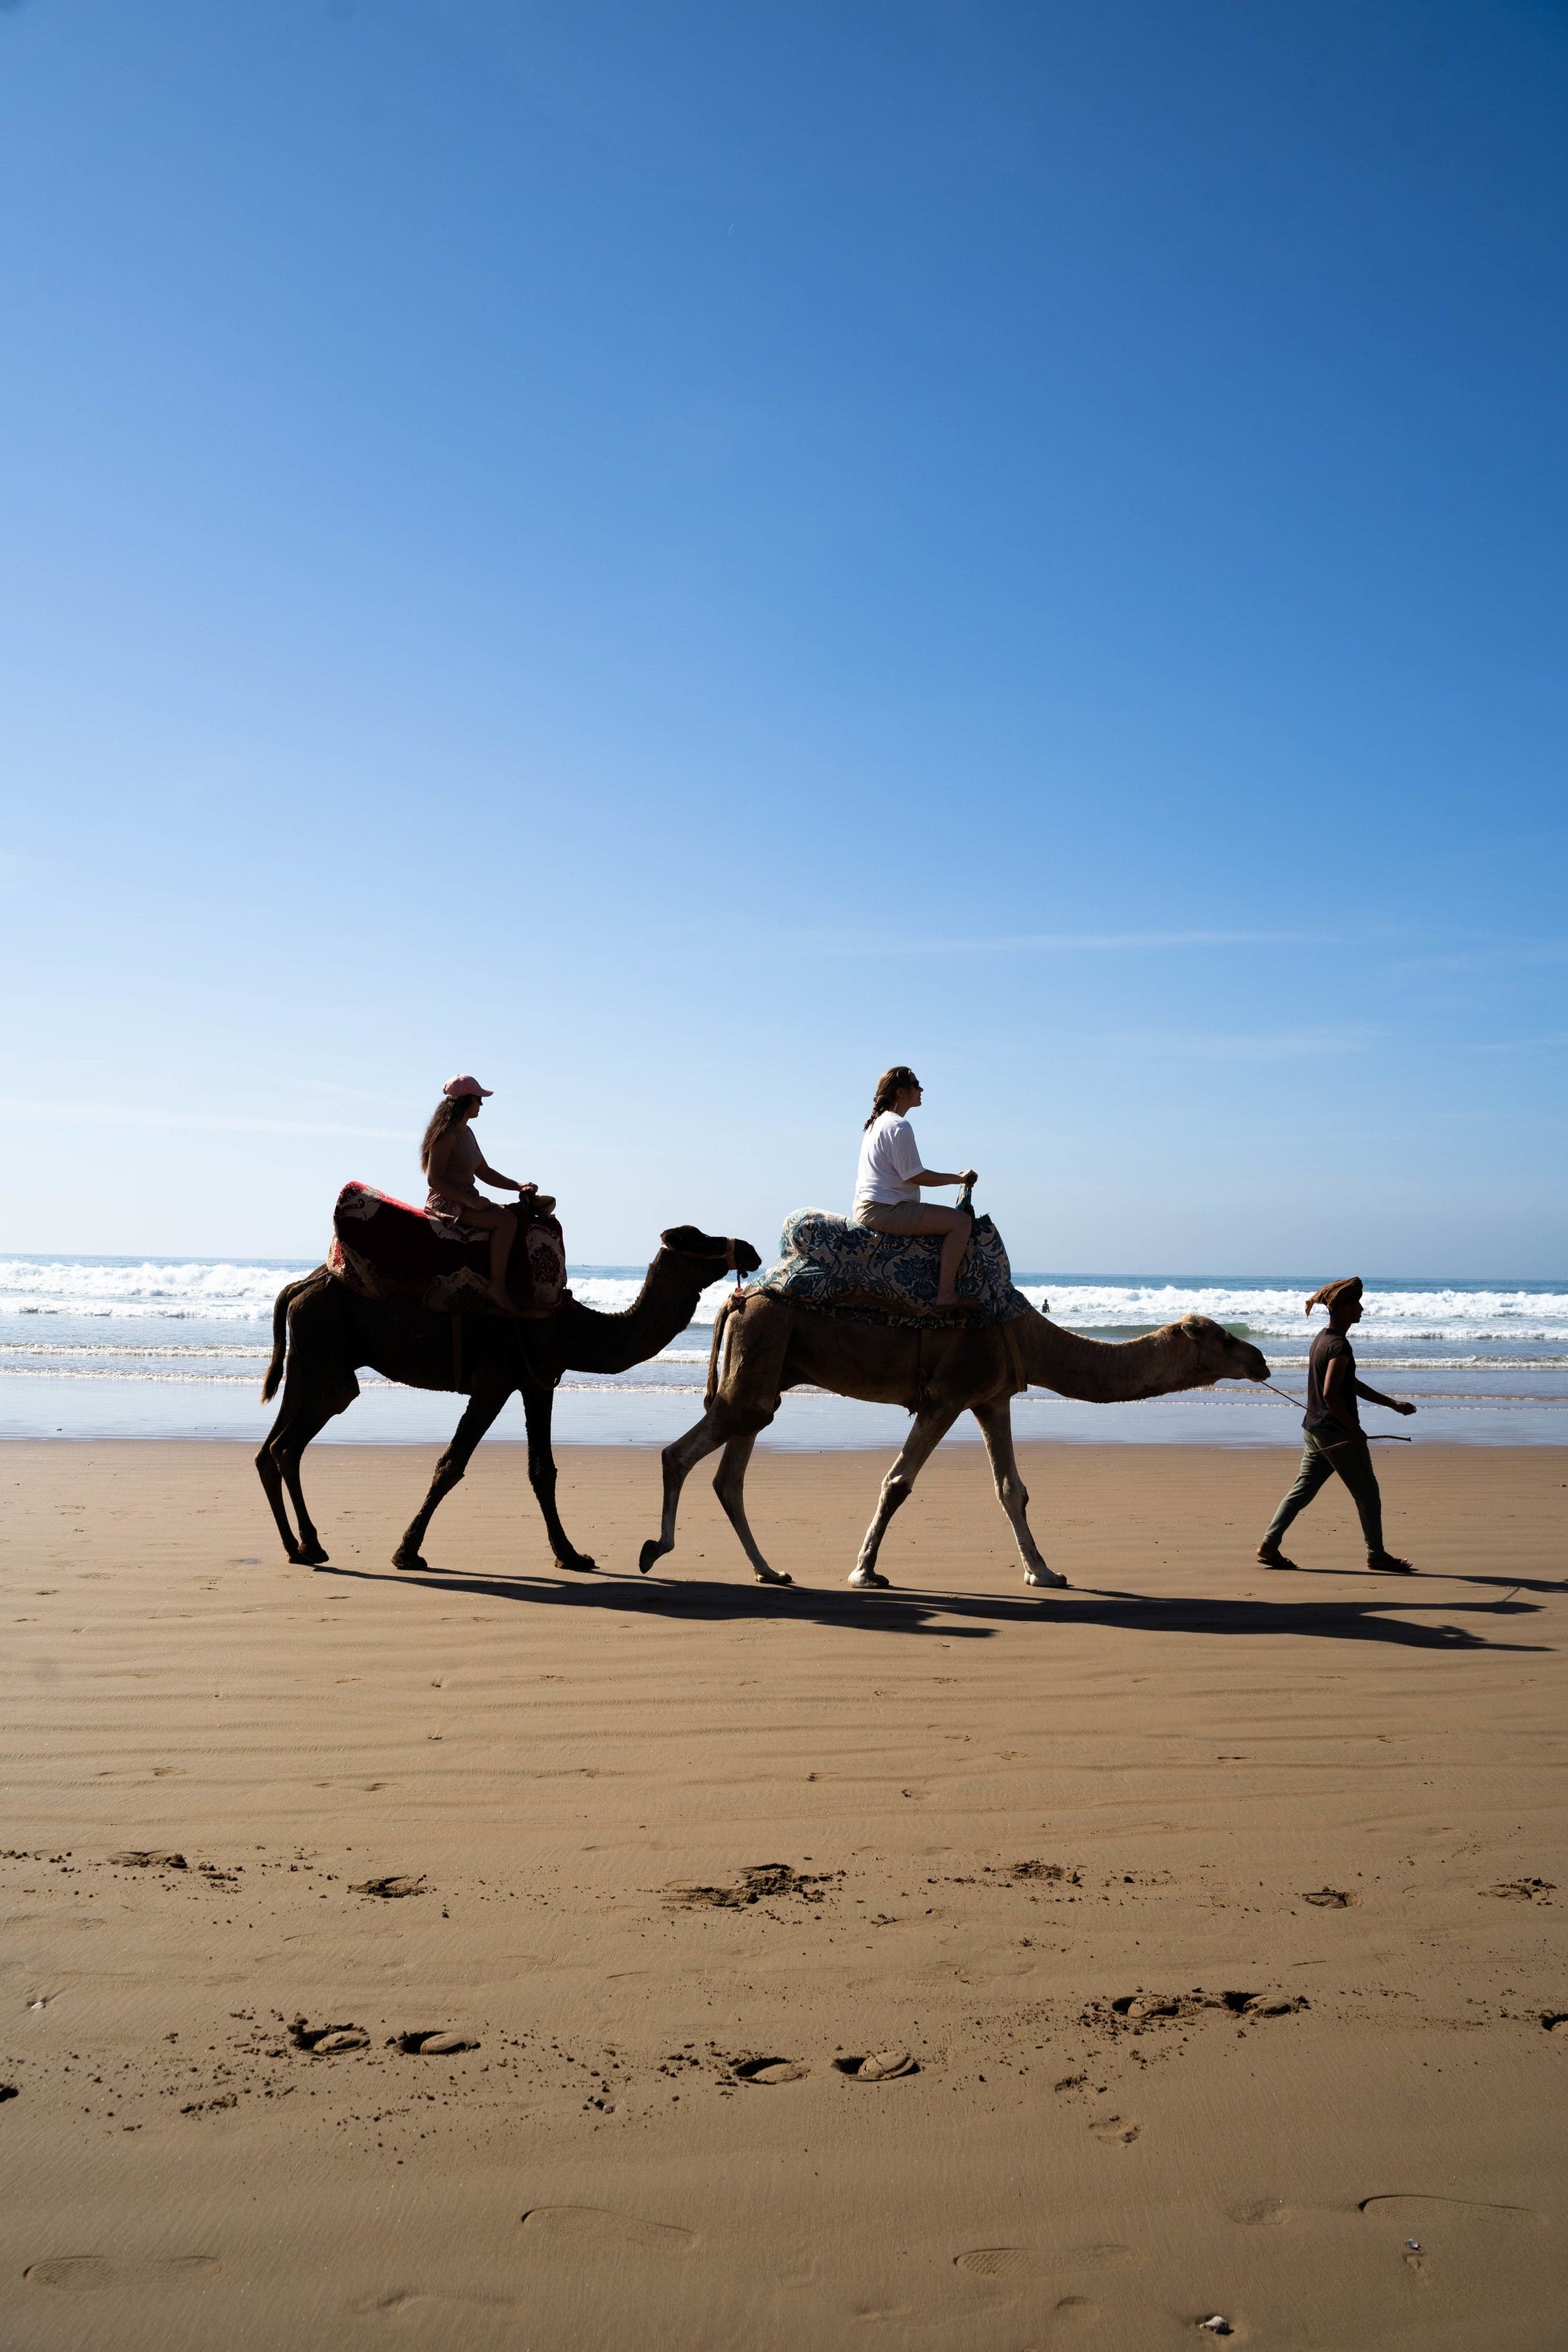 Two trip participants riding camels on the beach of Taghazout led by a leader.